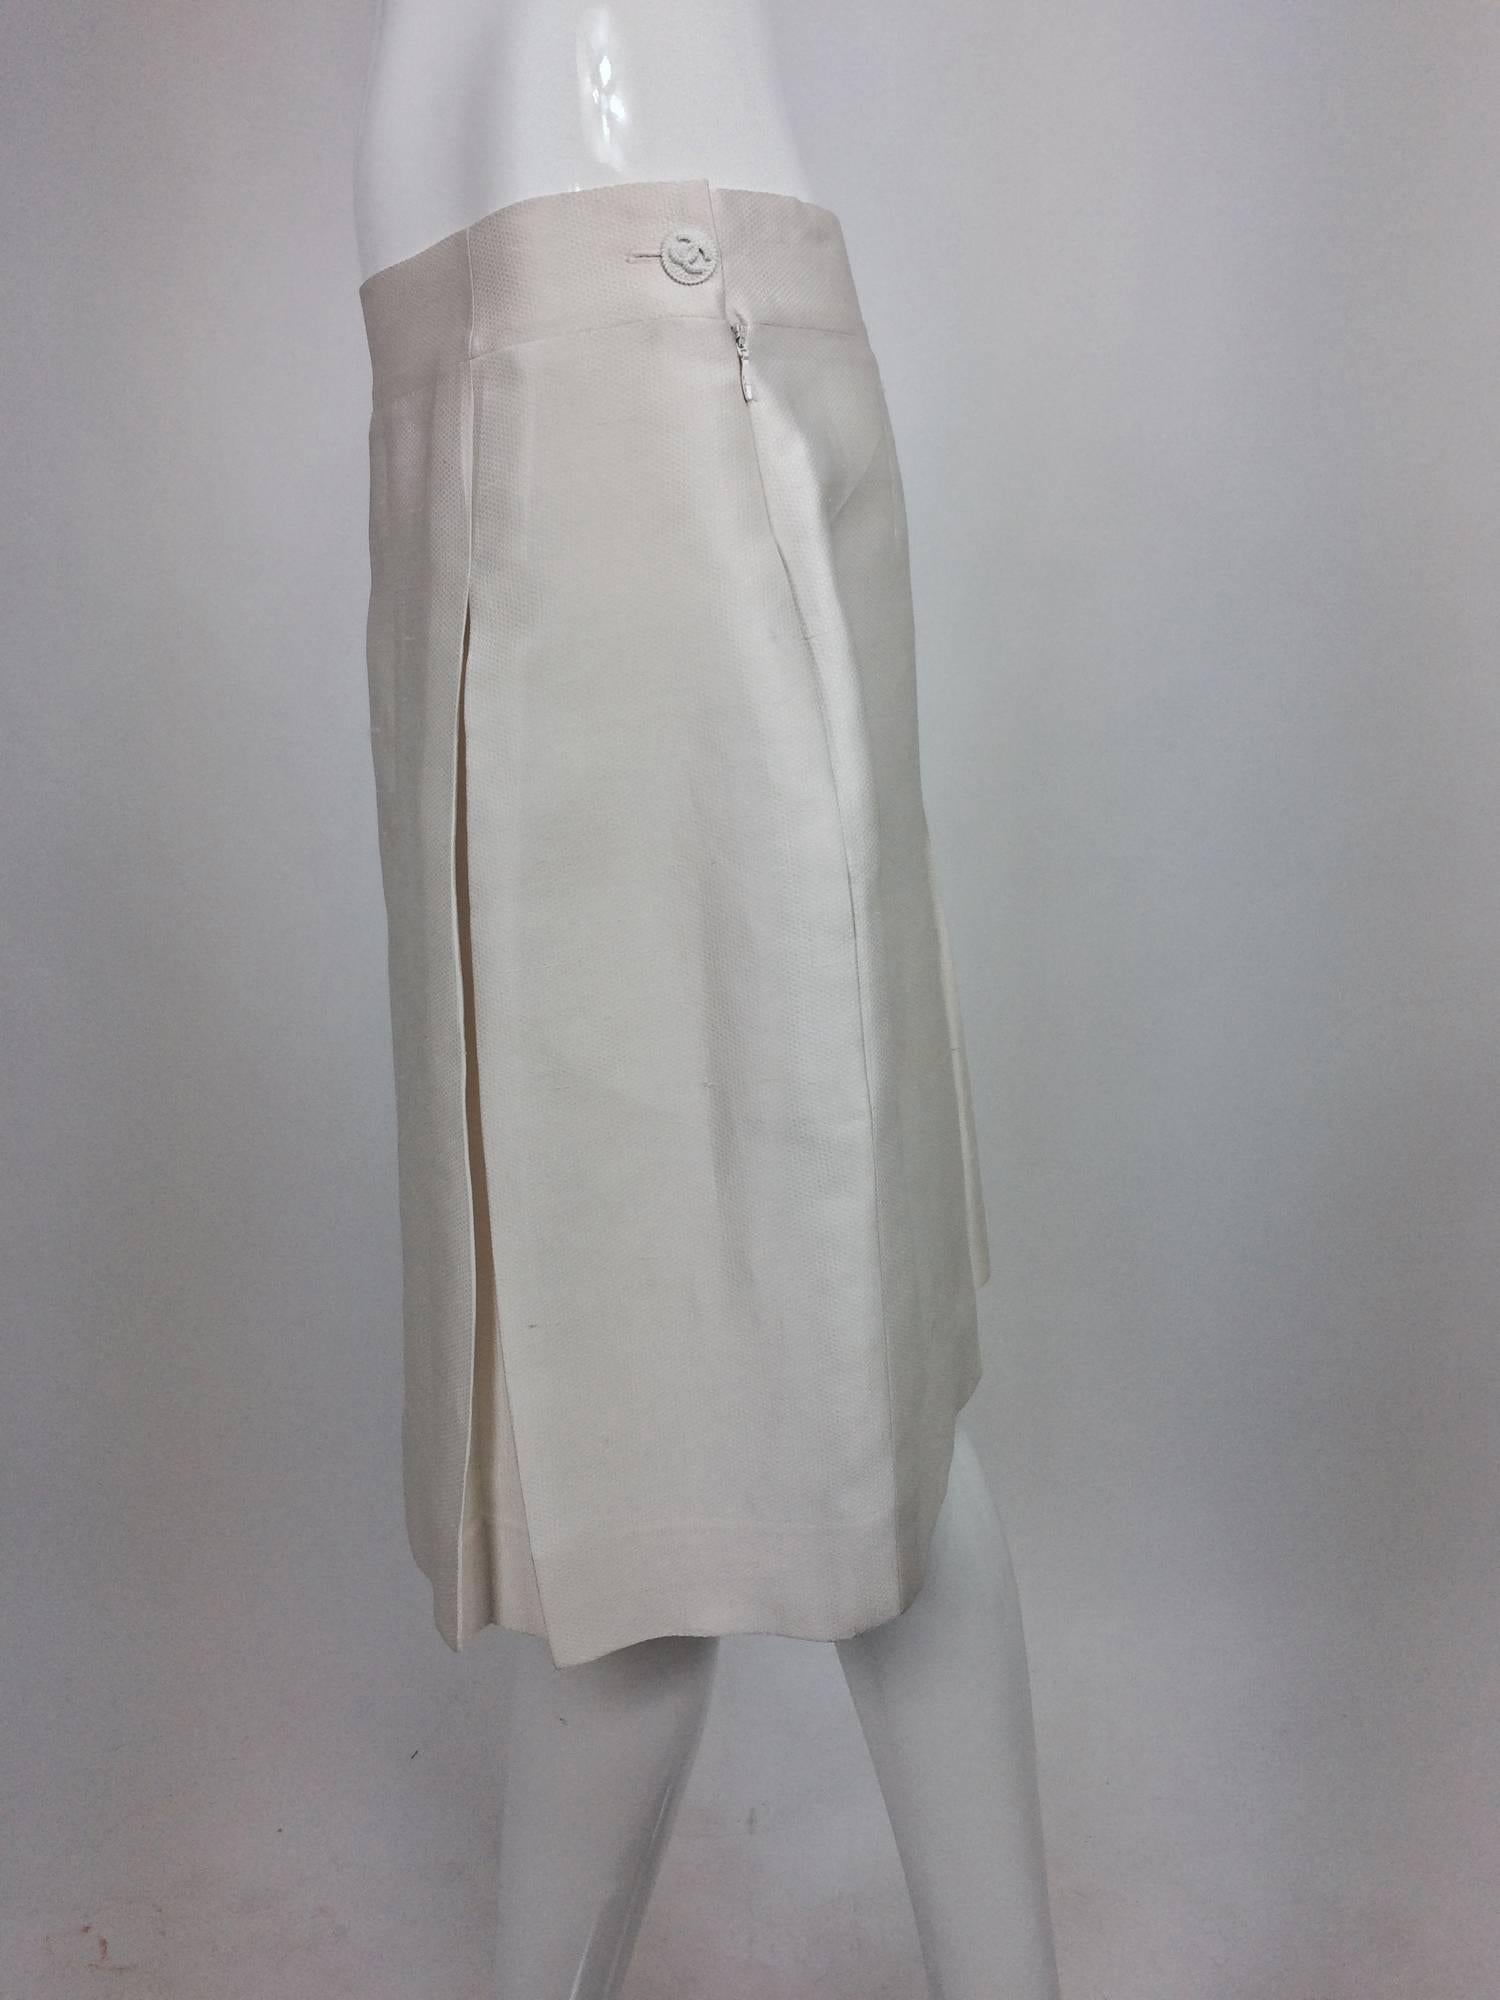 Chanel off white silk cotton pique box pleated skirt 2009...Stitched down pleats at the front and a single inverted pleat at the back...Closes at the side with a zipper and button at the waist side...On seam side pockets...Fully lined in white